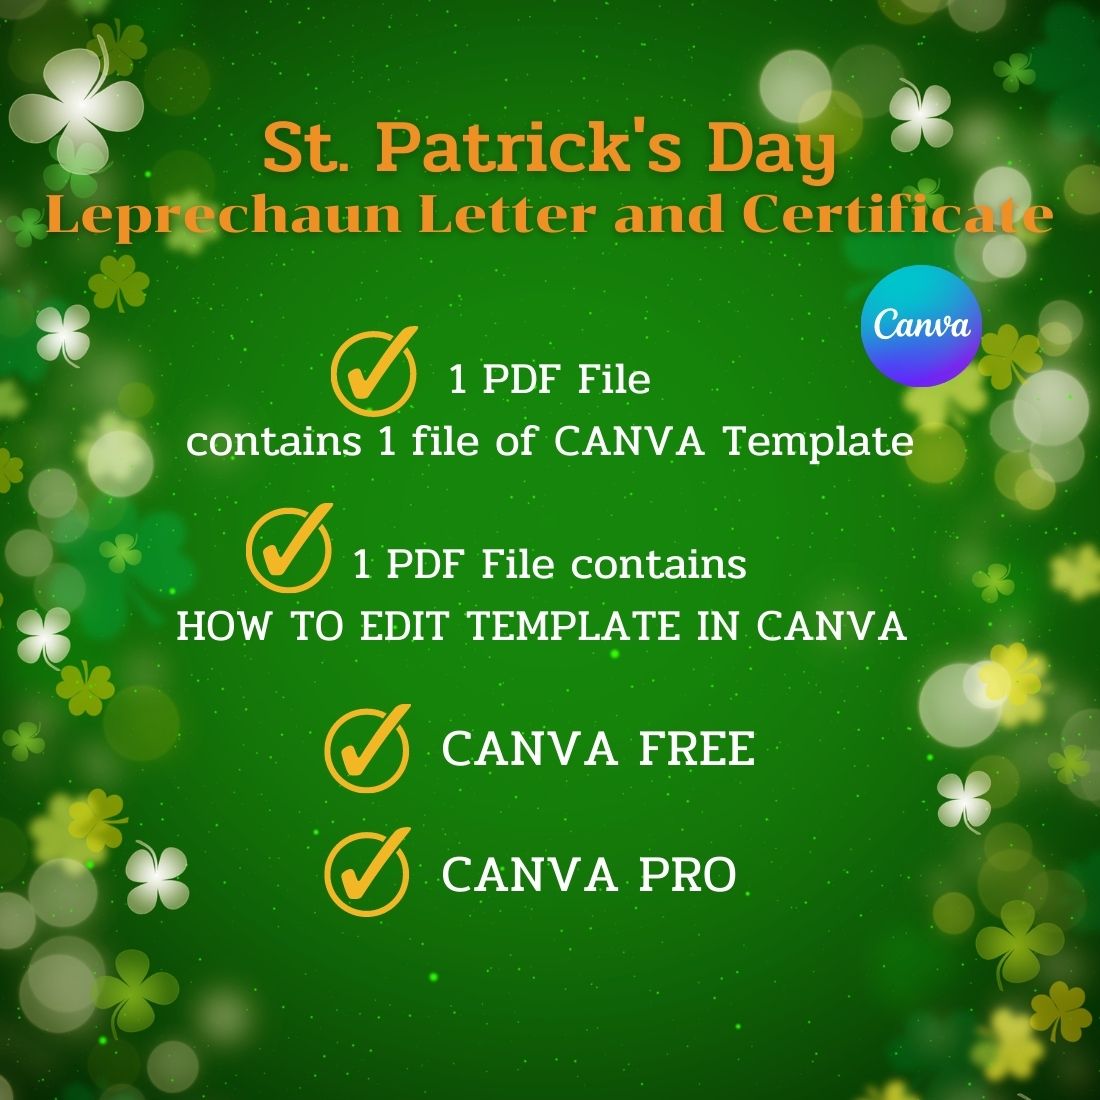 St patrick's day leprechaun letter and certificate.